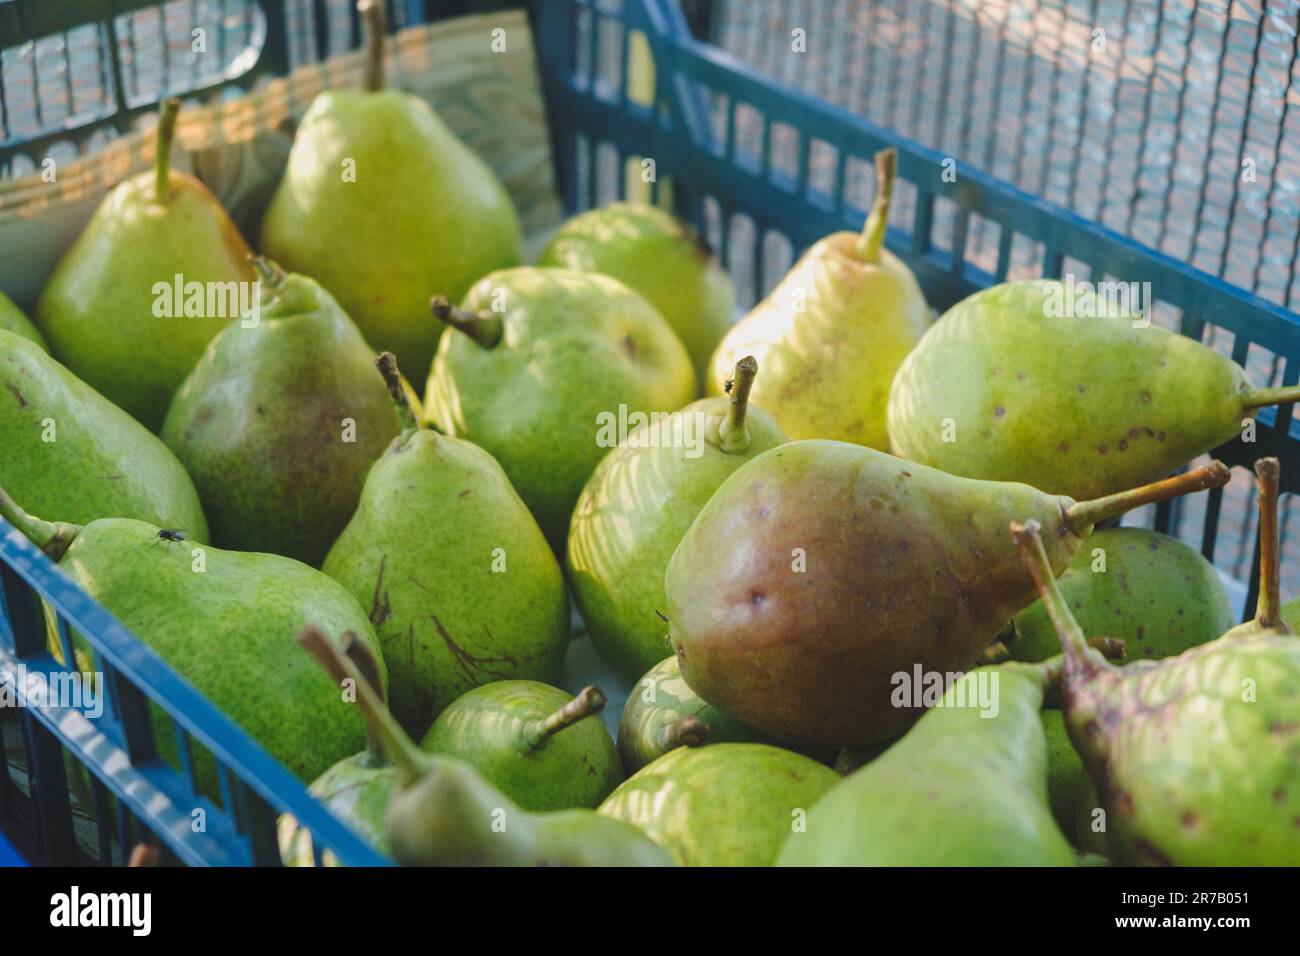 Pears in a basket, Large Group, Background Stock Photo